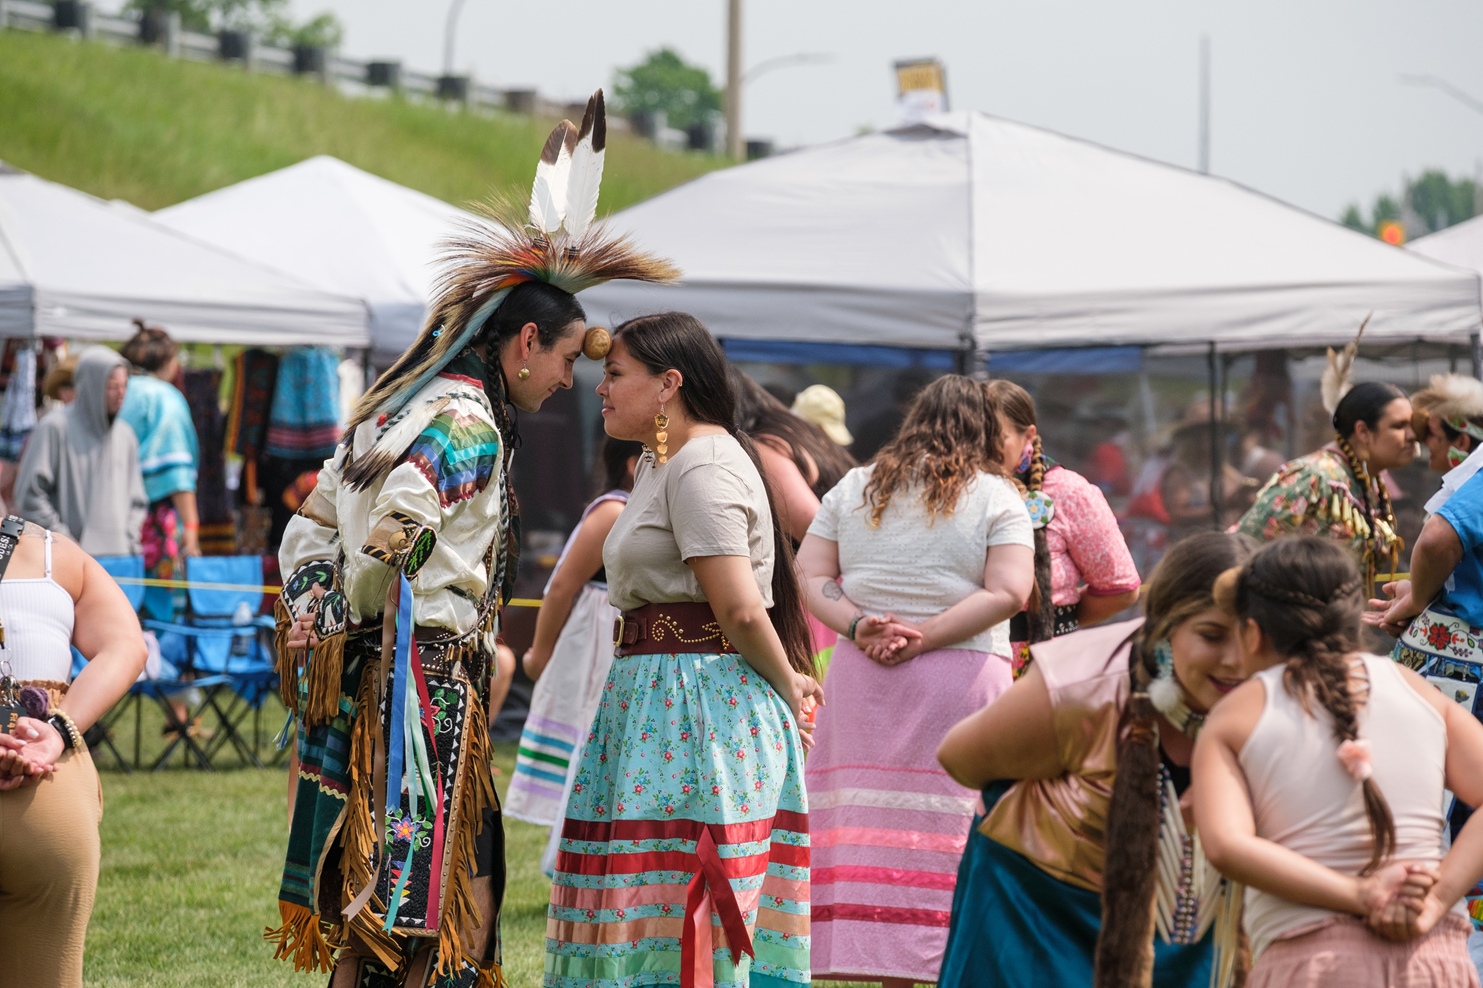 pairs of participants in beautiful traditional pow wow clothing delicately balance potatoes between their's and their partner's foreheads as they dance the potato dance. The partners have their hands clasped behind their backs and are smiling at each other and seem to be having a lot of fun.